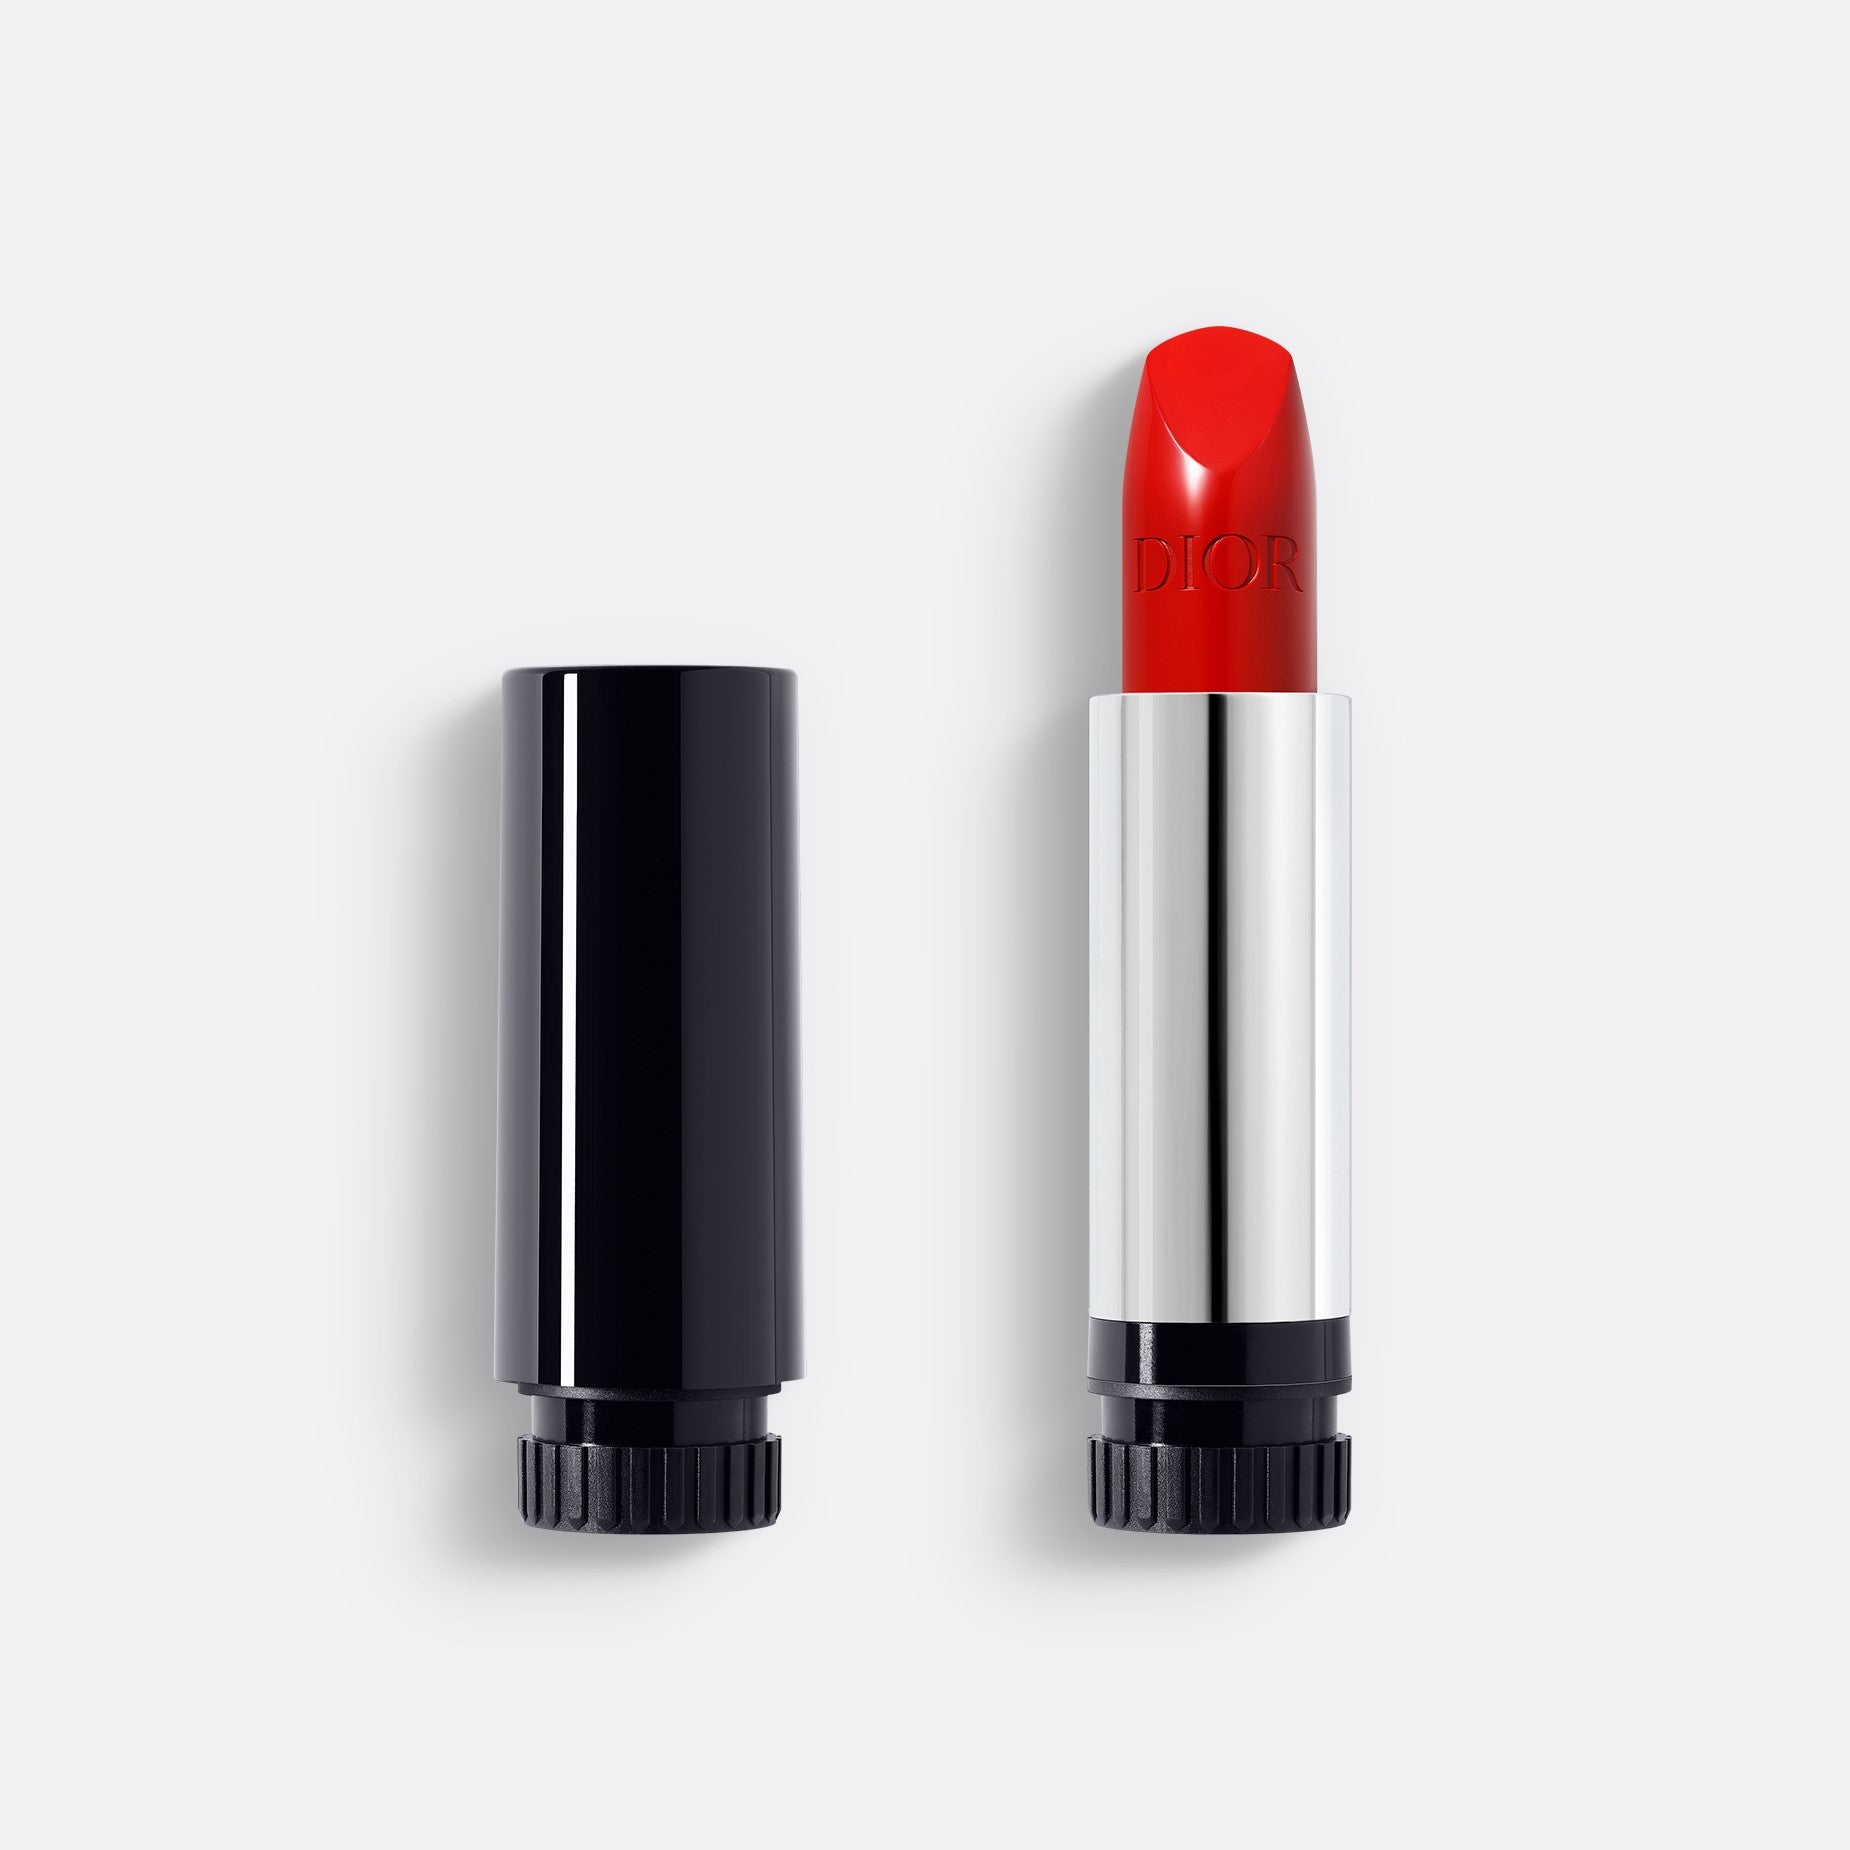 ROUGE DIOR THE REFILL | Couture Colour Lipstick - Velvet and Satin Finishes - Hydrating Floral Lip Care - Long Wear